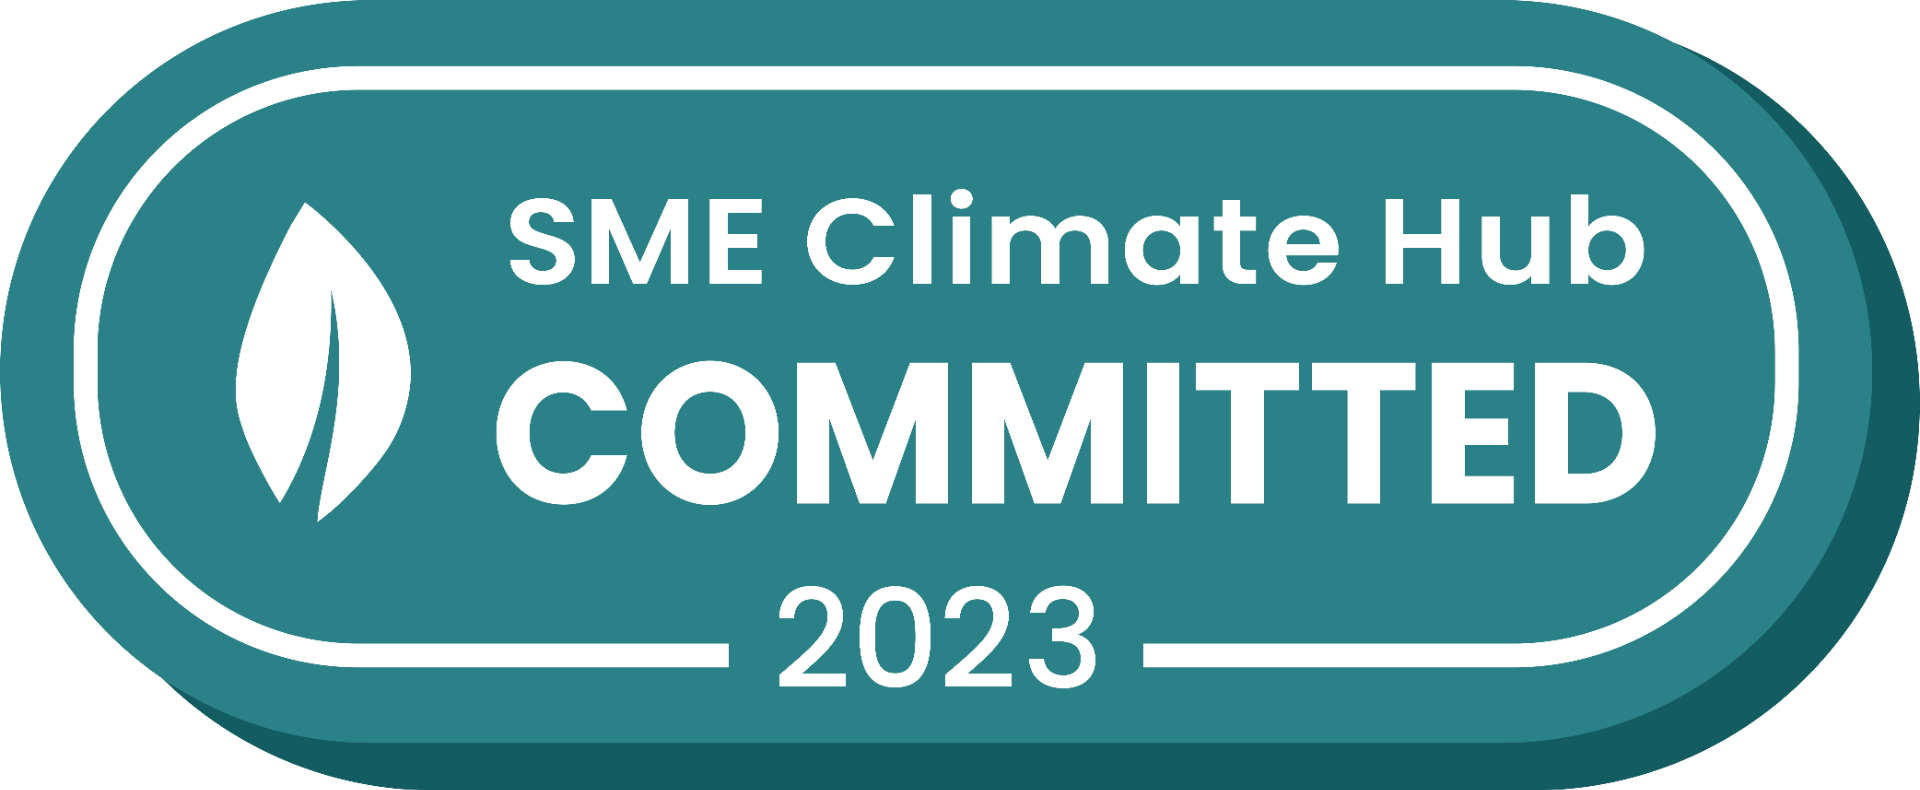 2023_SME_Committed_Badge